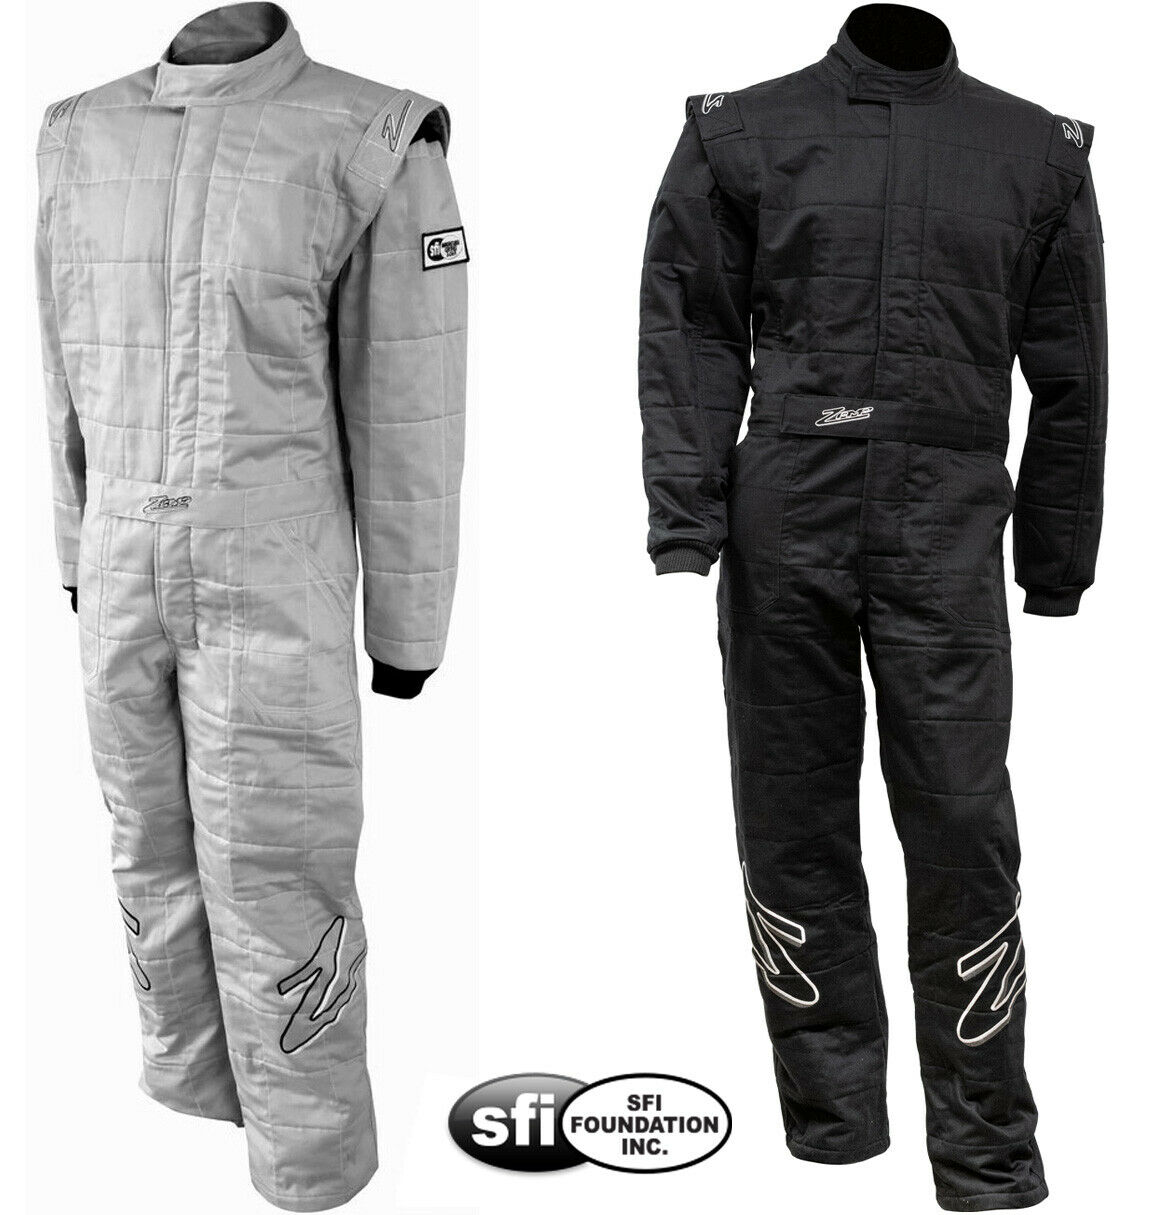 Zamp - Zr-30 Sfi-5 Auto Racing Suit - 1-piece Nomex Style Fire Sfi 3.2a/5 Rated